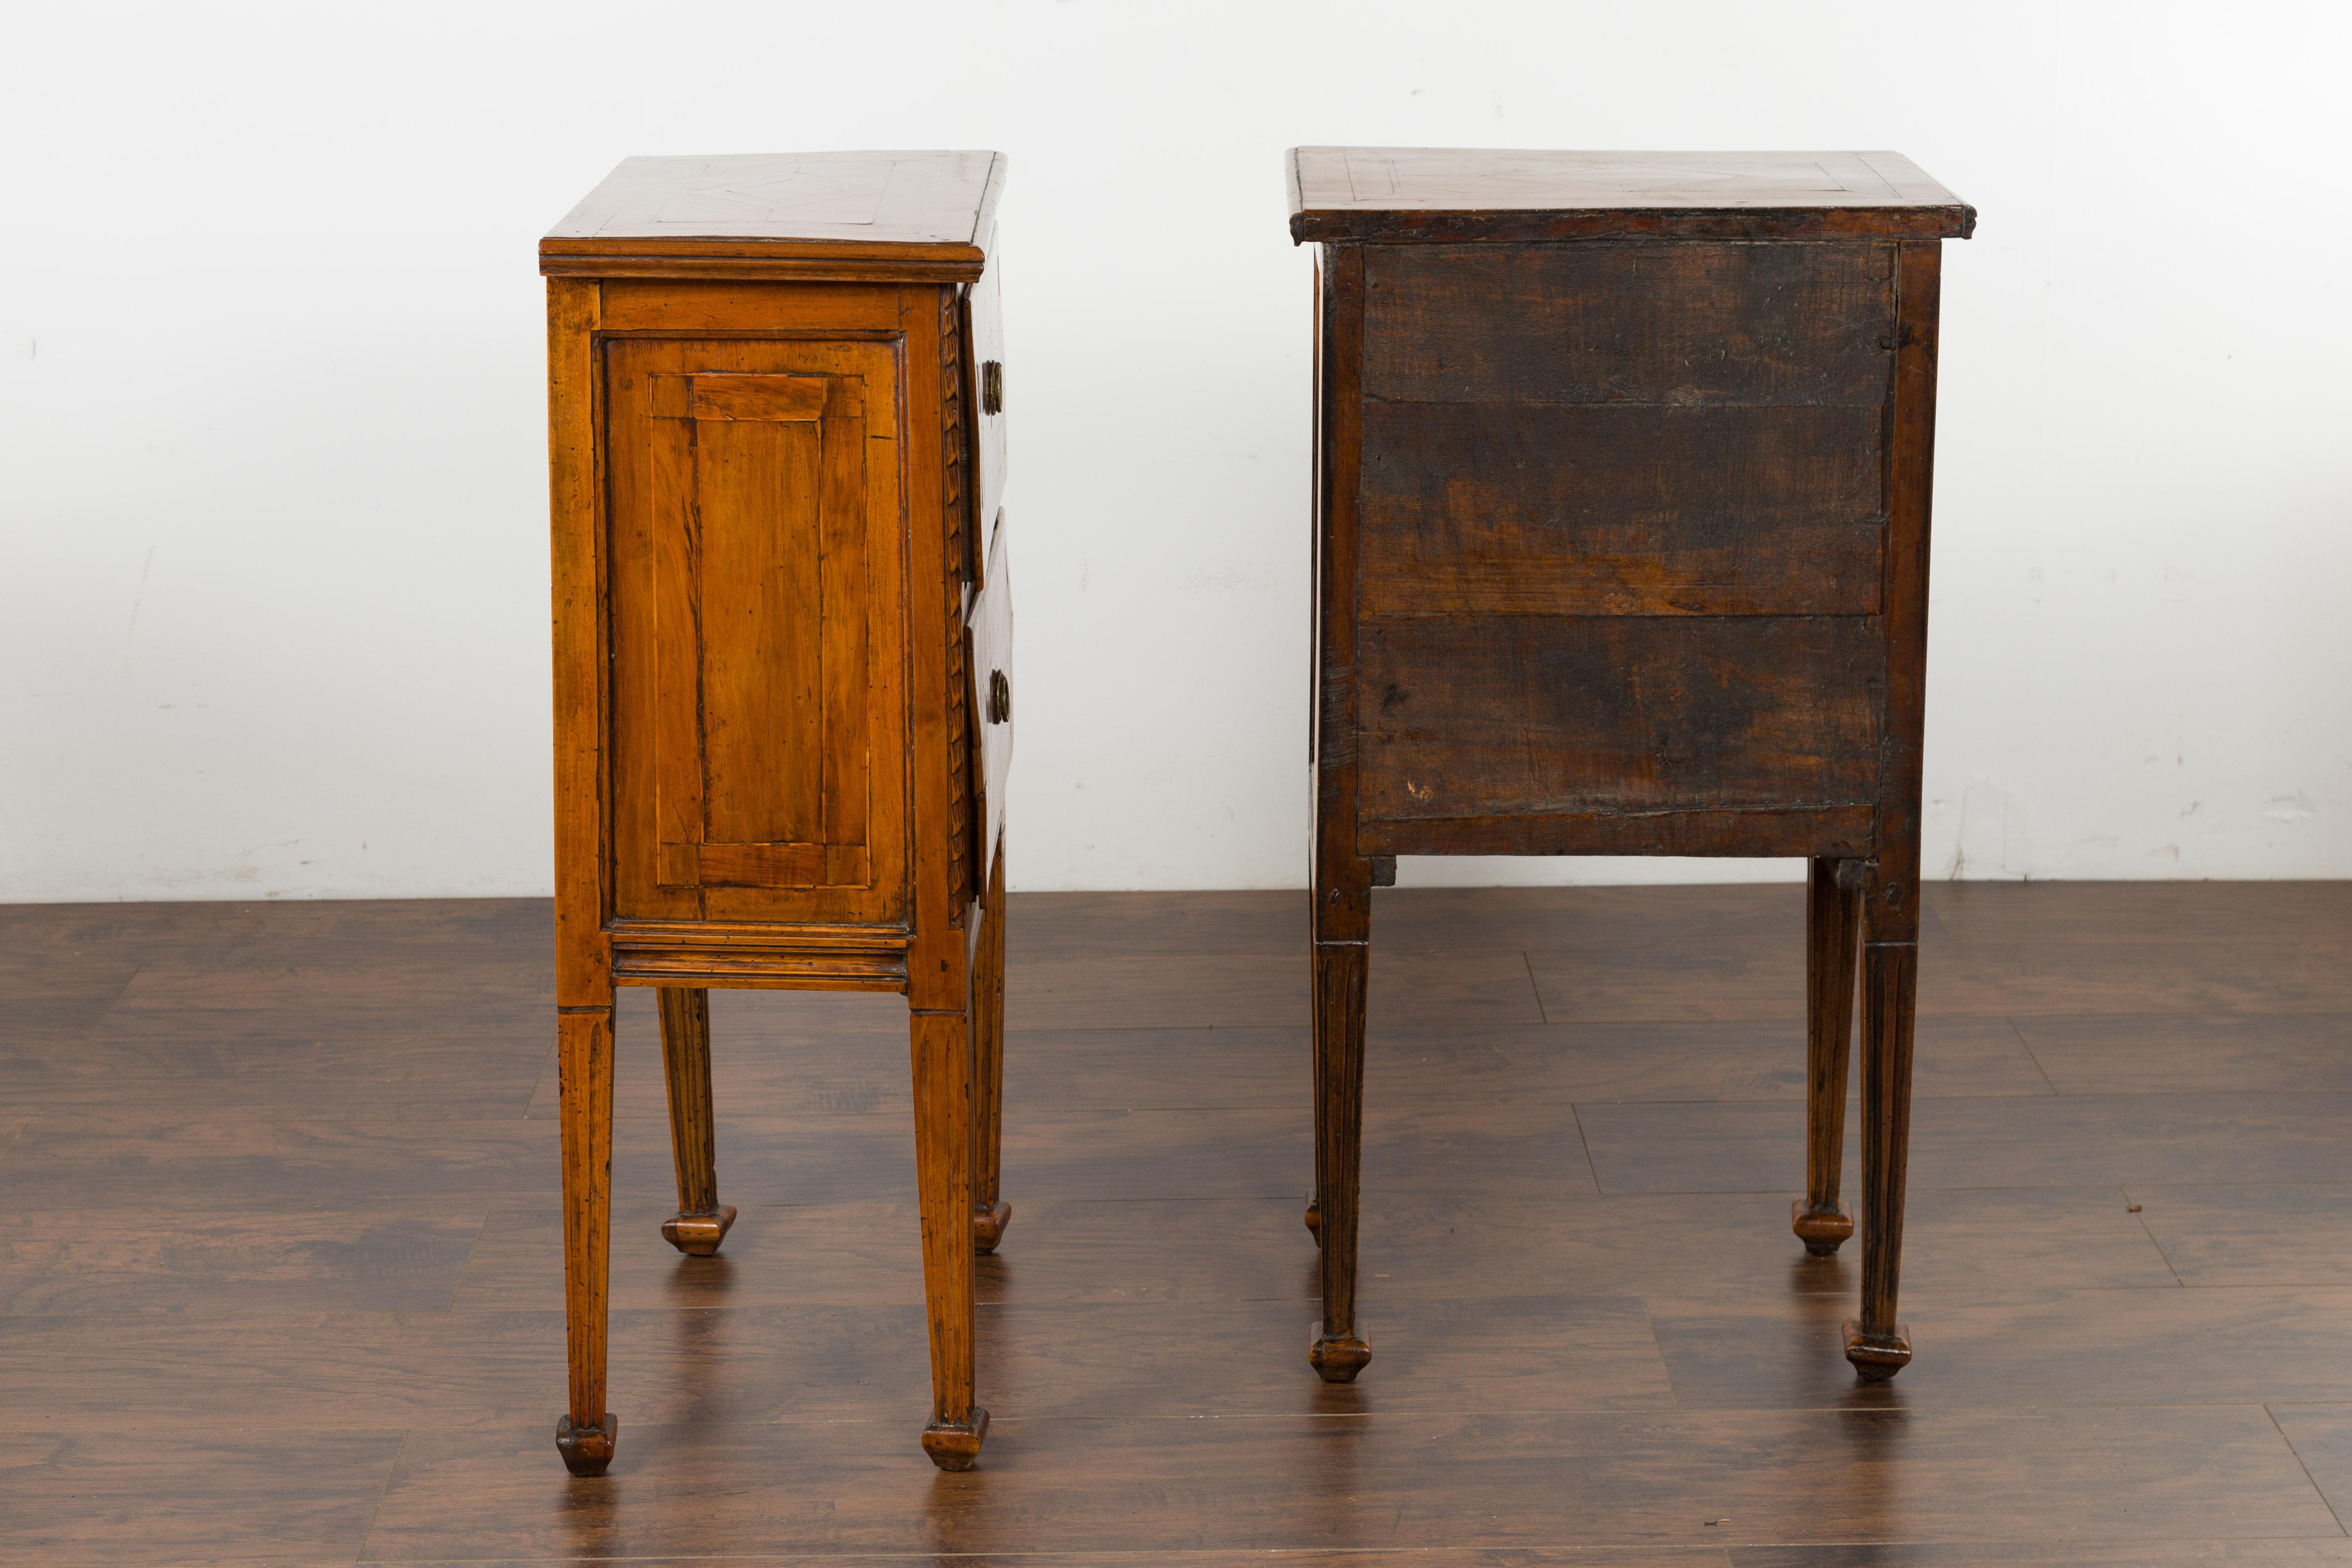 Pair of Italian 1820s Neoclassical Period Walnut Bedside Tables with Two Drawers For Sale 5